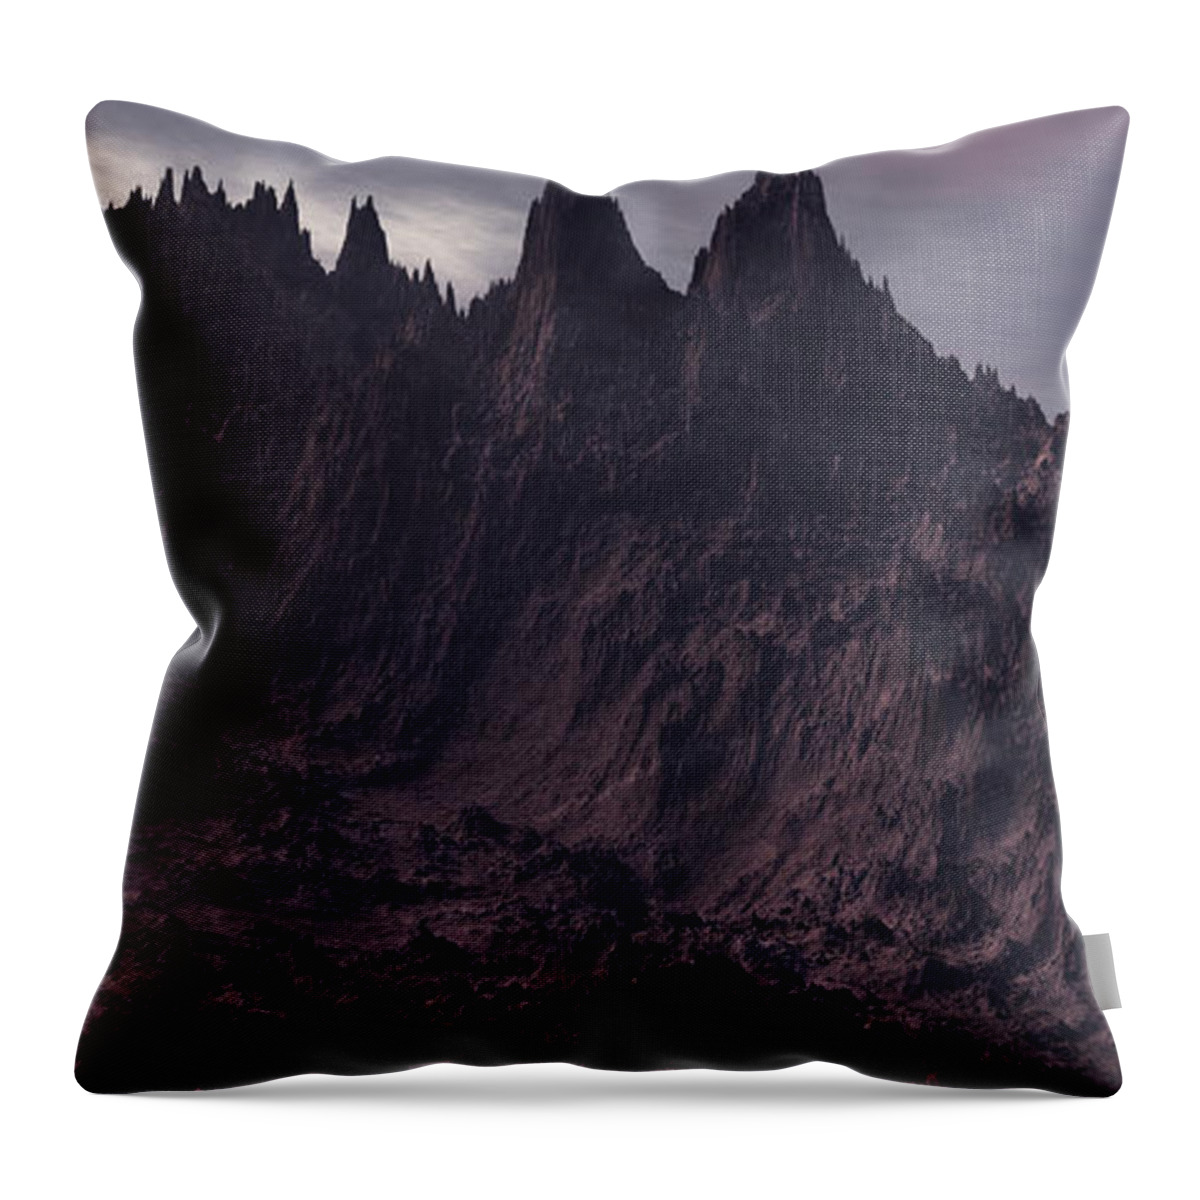 Lovecraft Throw Pillow featuring the digital art Mountains of Madness by Bernie Sirelson